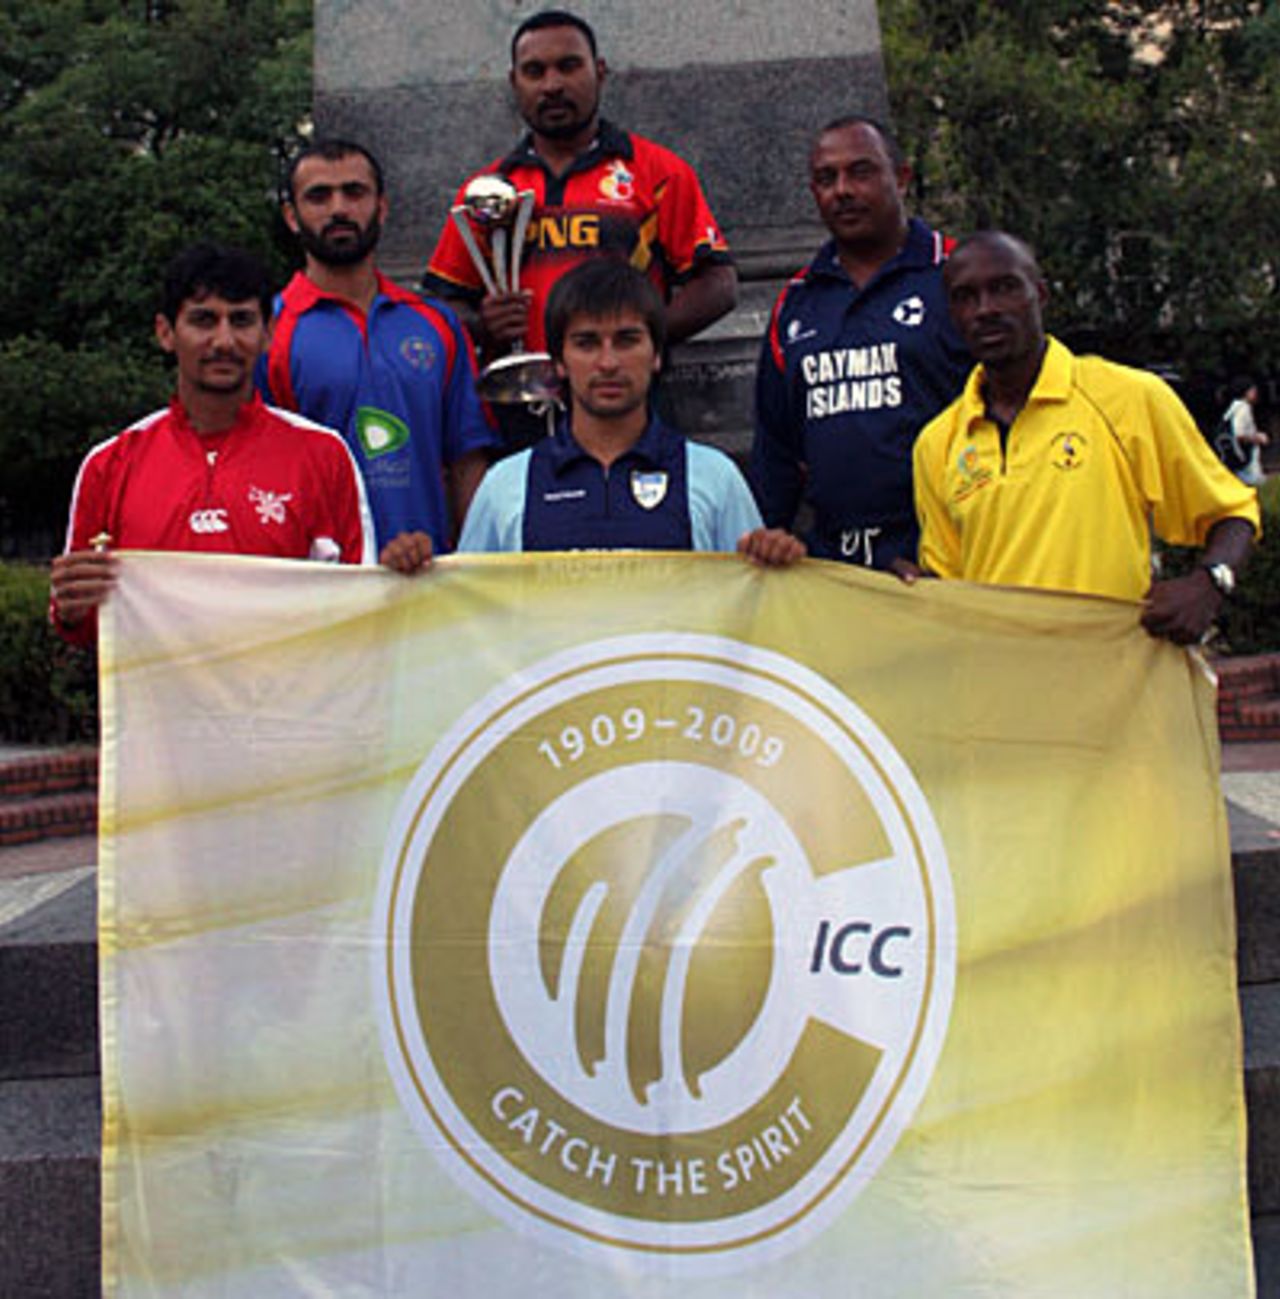 The captains with the ICC Centenary Flag